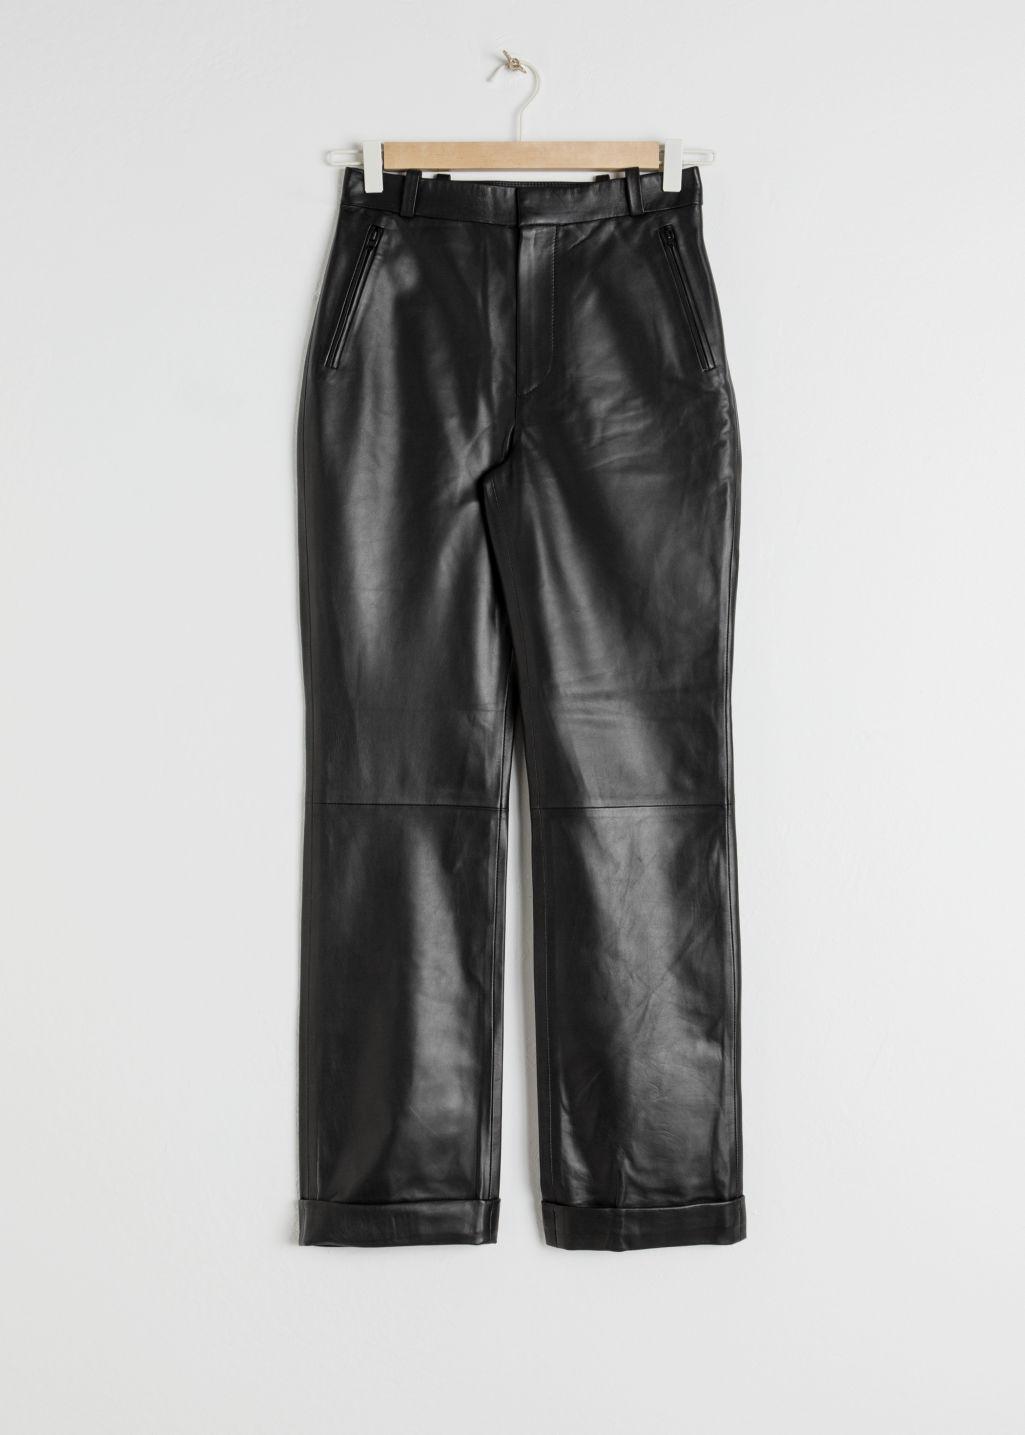 & Other Stories Cuffed Leather Trousers in Black | Lyst Australia